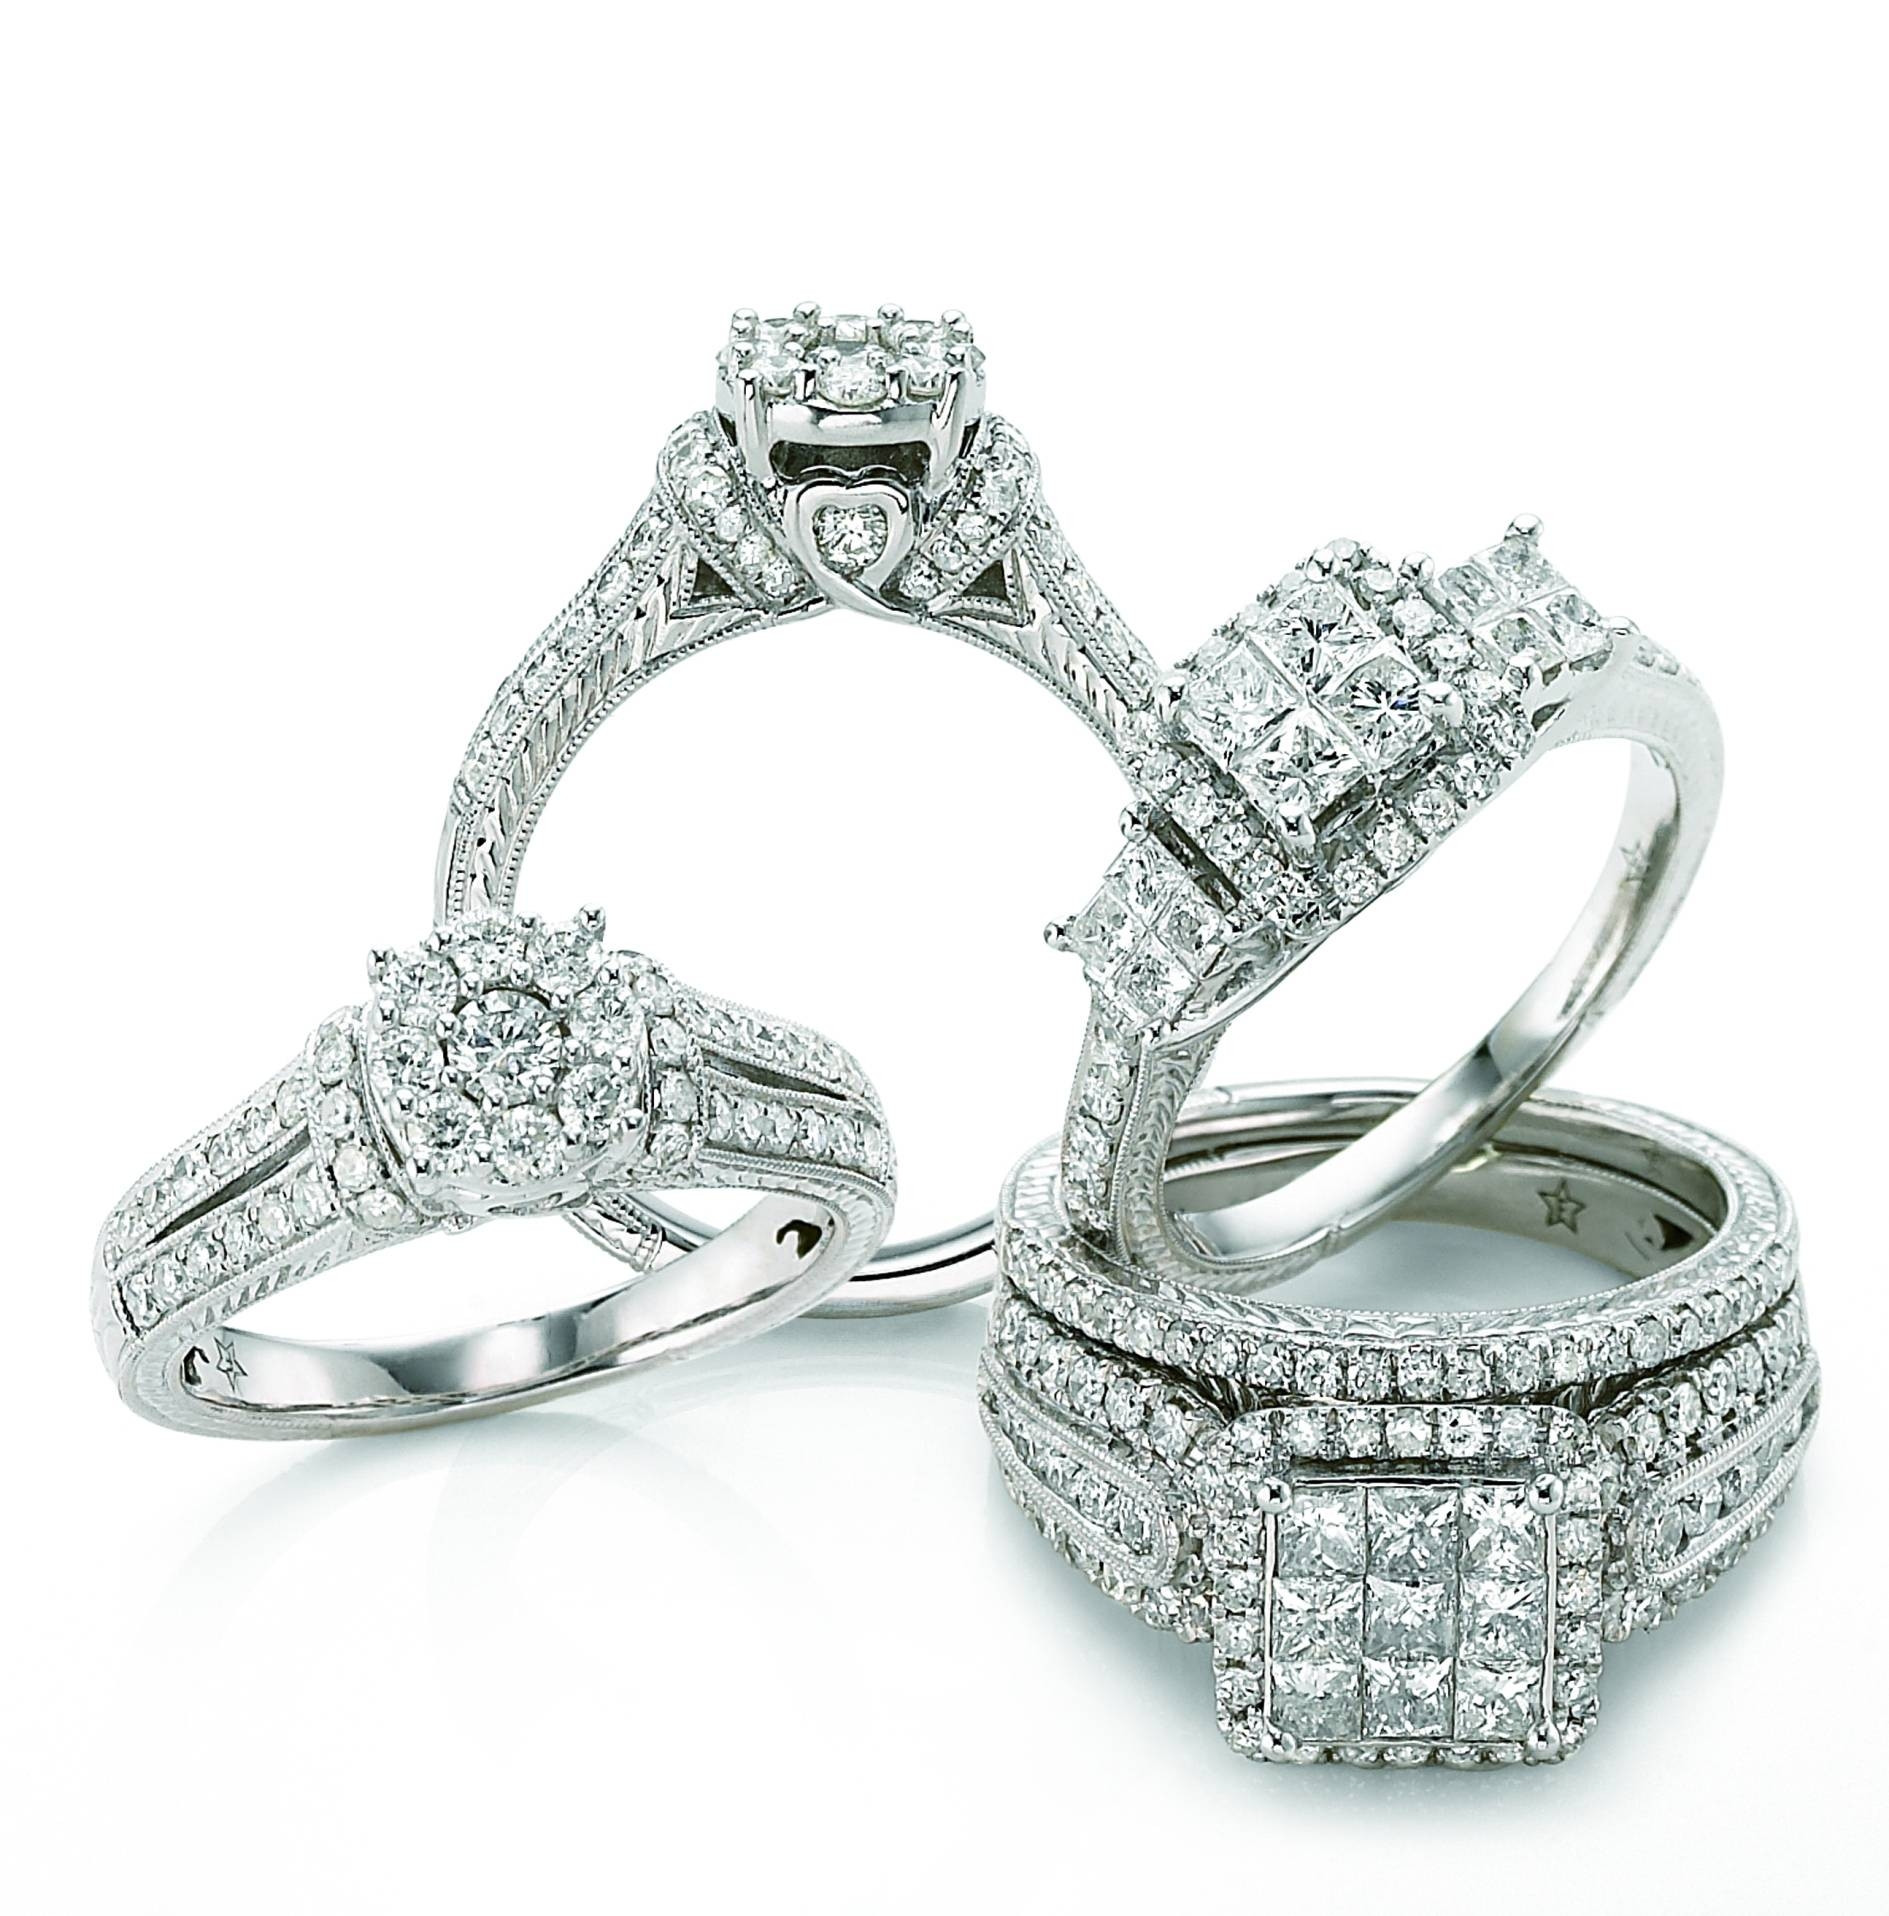 Jcpenney Wedding Rings
 15 Best Collection of Jcpenney Jewelry Wedding Bands